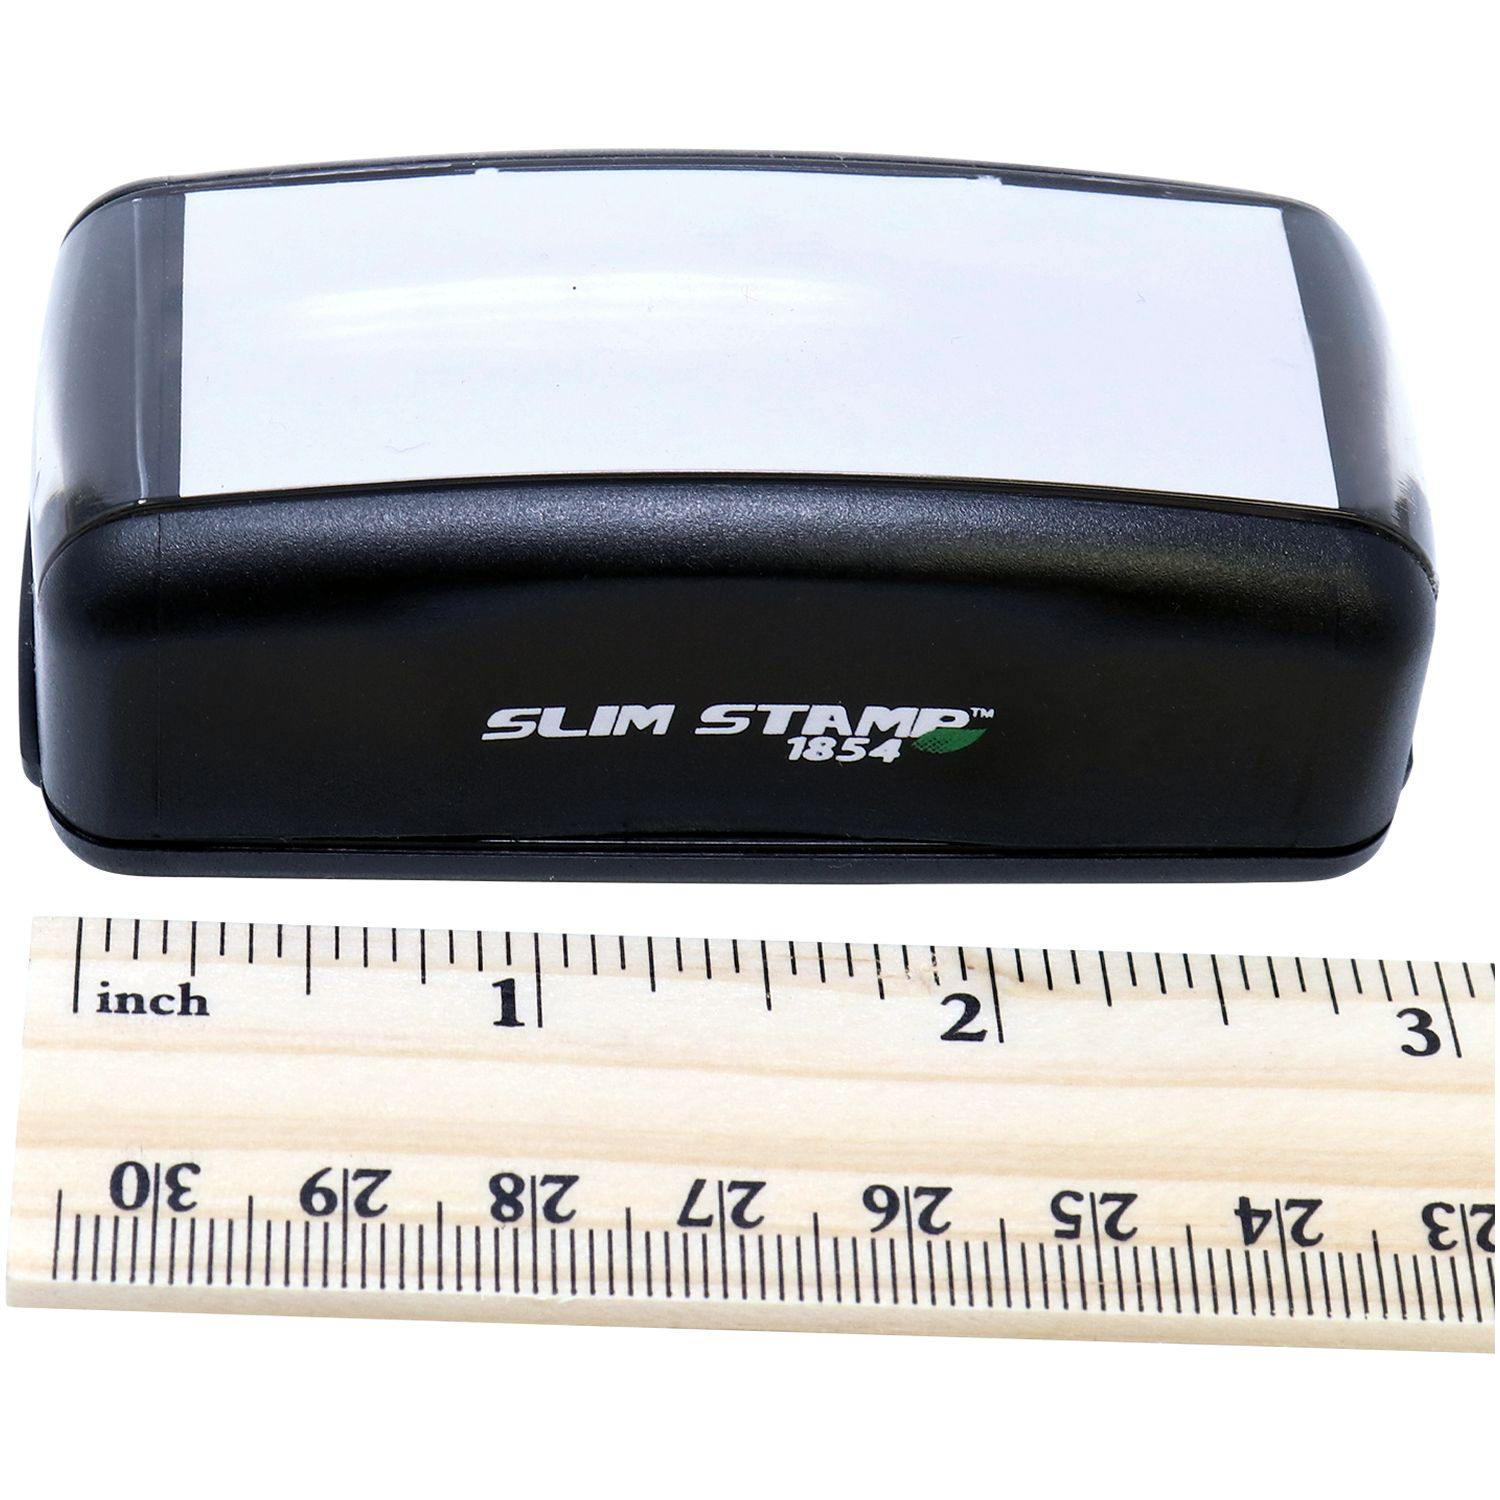 Measurement Large Pre-Inked Attorneys' Copy Stamp with Ruler